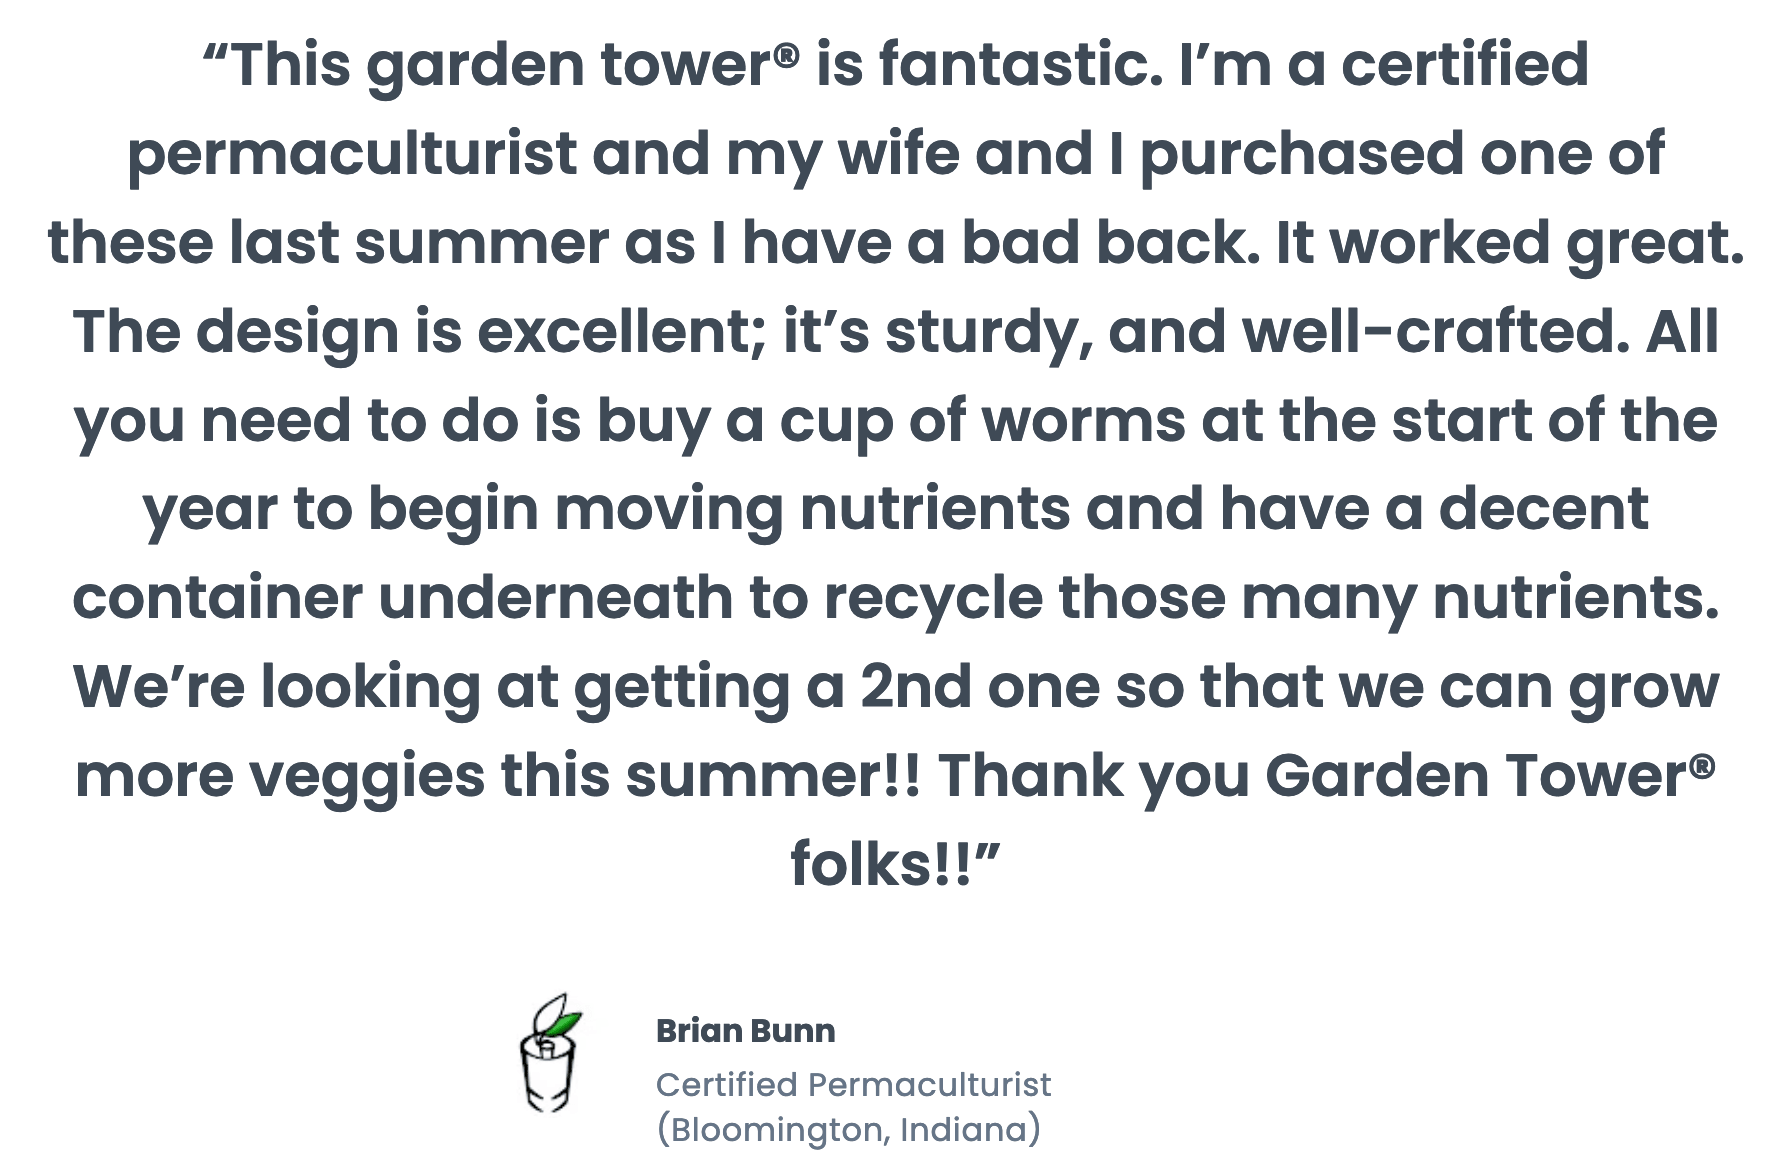 3rd review of the Garden Tower